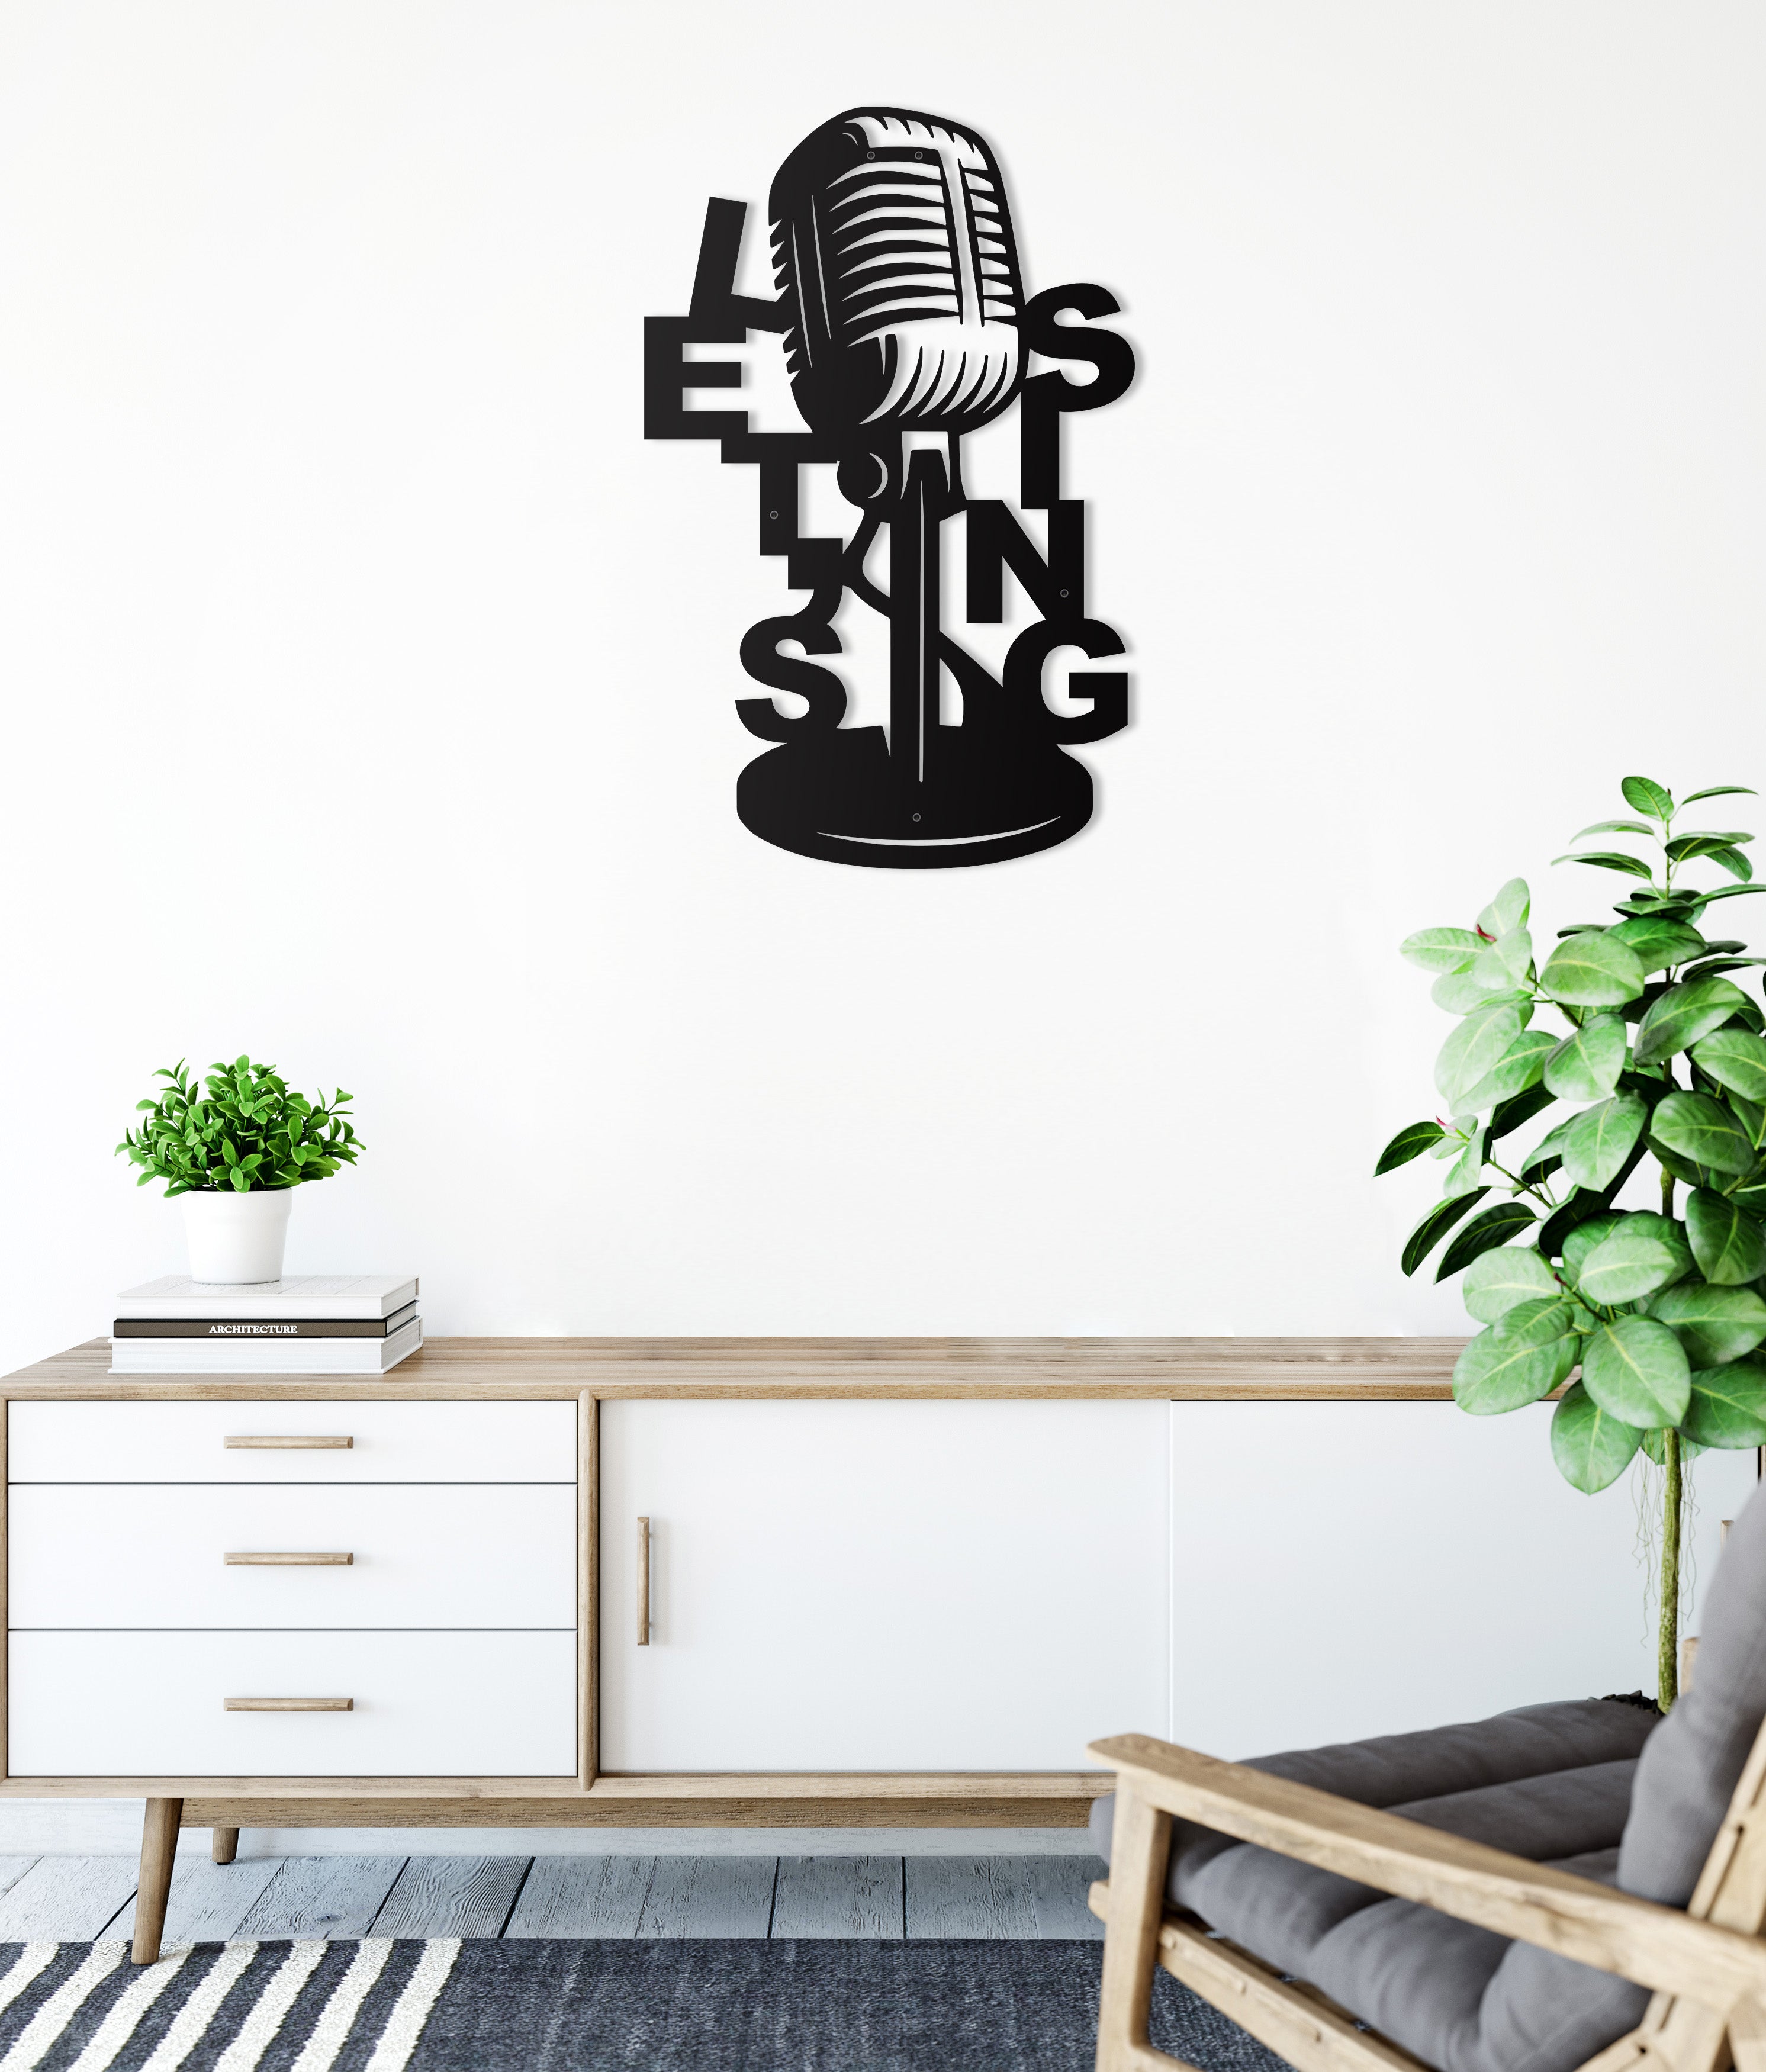 Microphone Wall Decor,Music Metal Wall Decor,Modern New Home Gift,Young Room Art Decor Housewarming Gifts Idea Wall Hanging Decoration